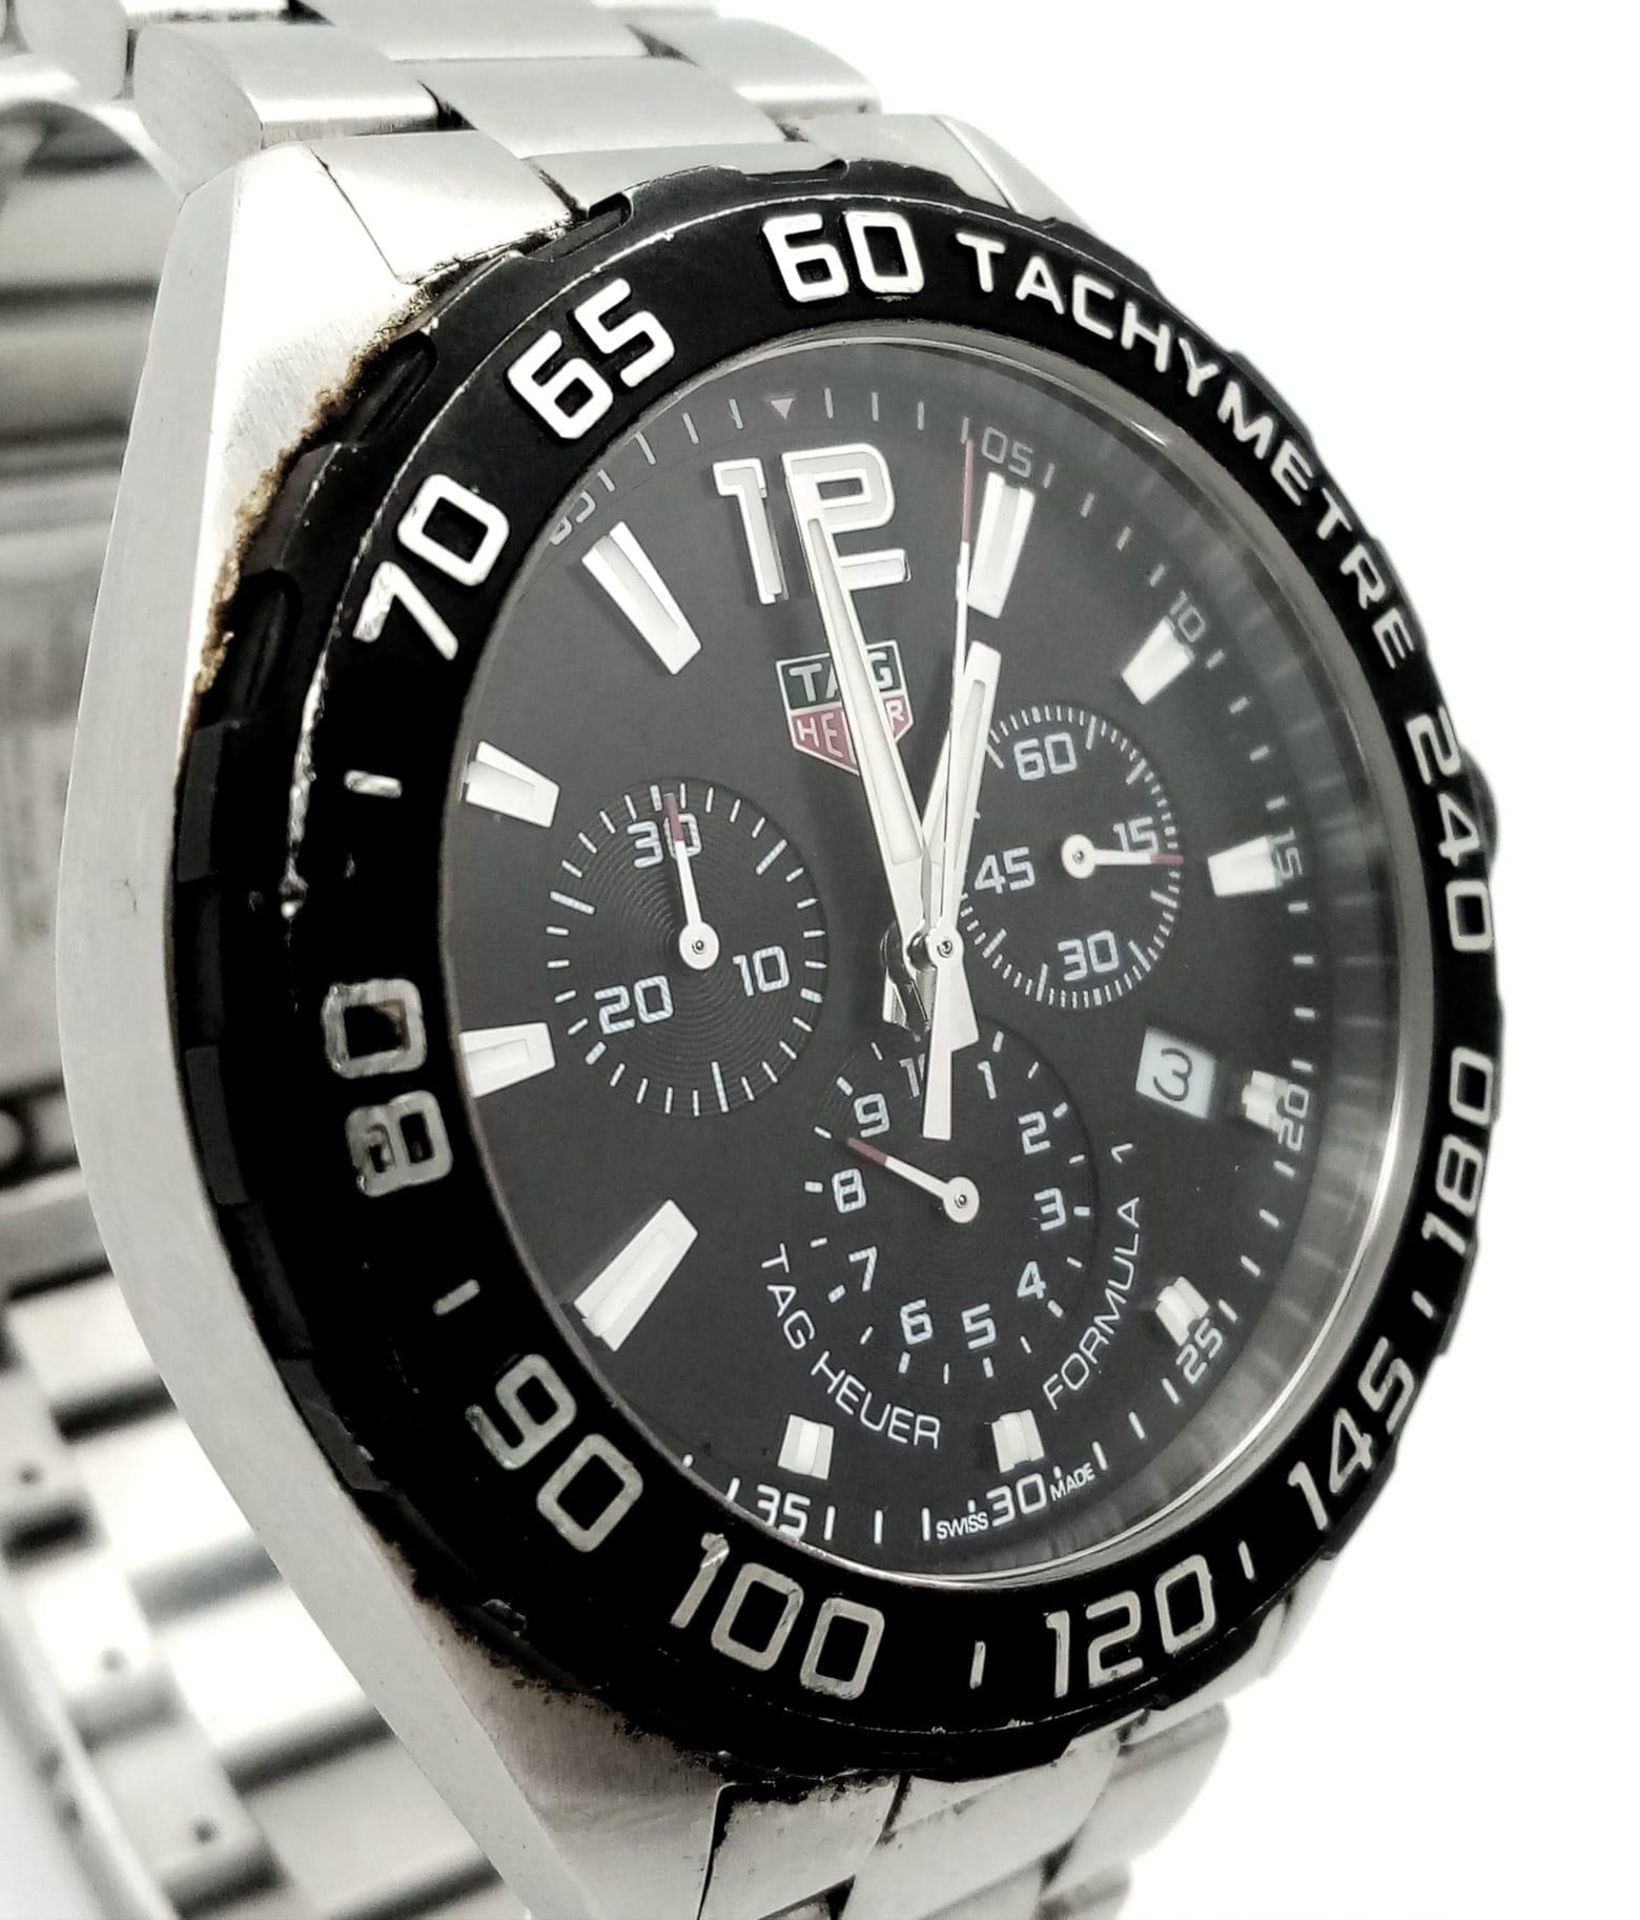 A Tag Heuer Formula Chronograph Gents Watch. Stainless steel bracelet and case - 43mm. Black dial - Image 3 of 7